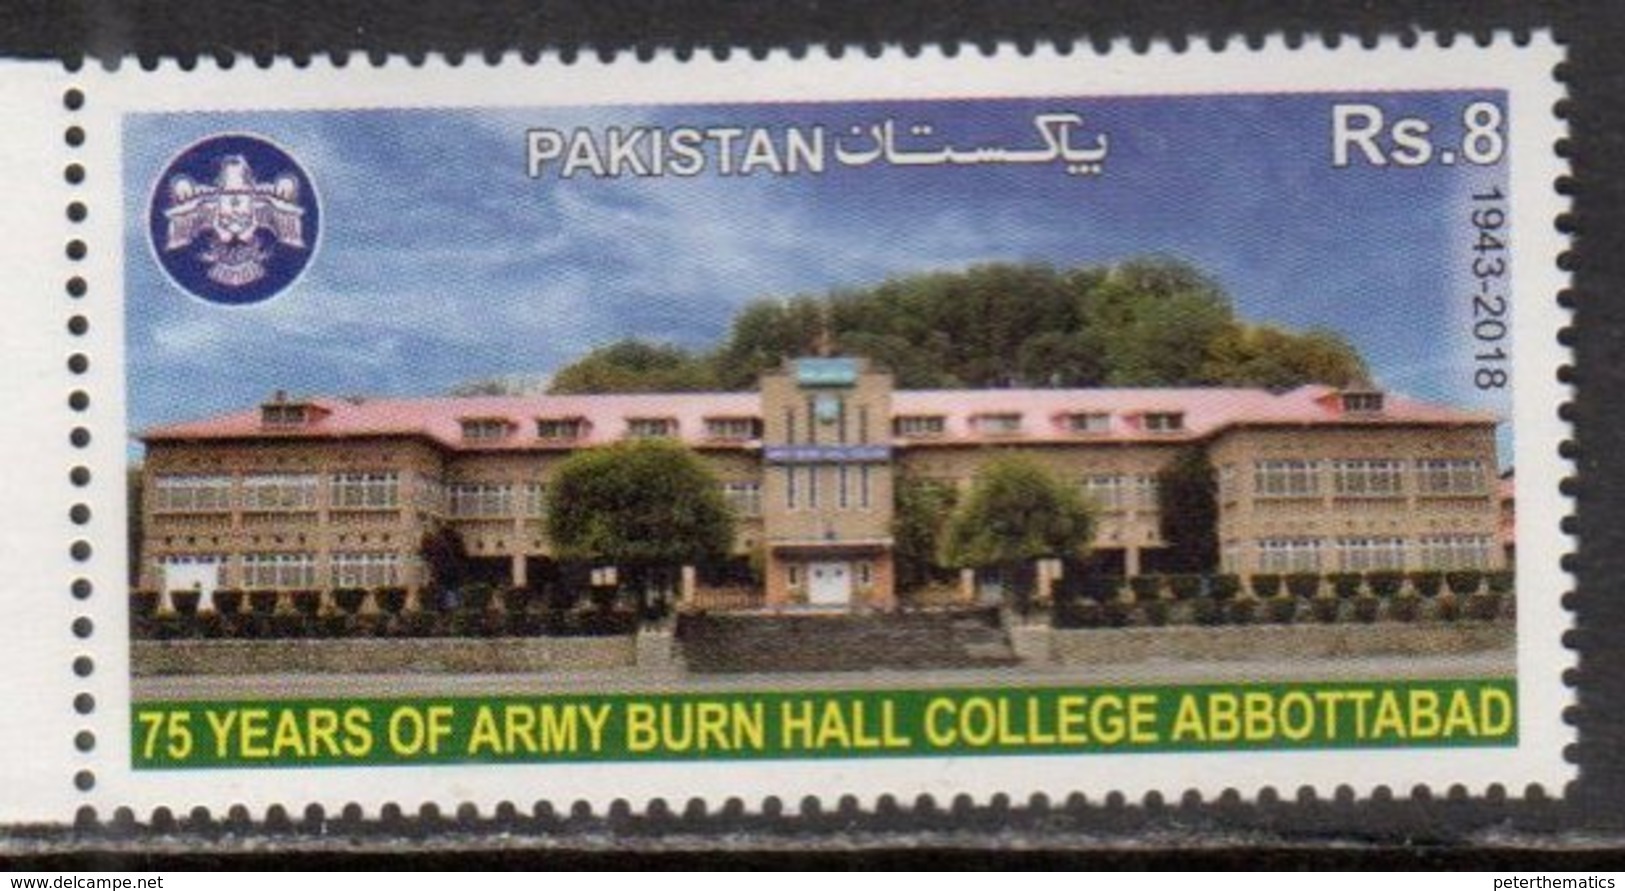 PAKISTAN, 2018, MNH,MILITARY, ARMY COLLEGE, ABBOOTTABAD, ARCHITECTURE, EDUCATION, 1v - Militaria